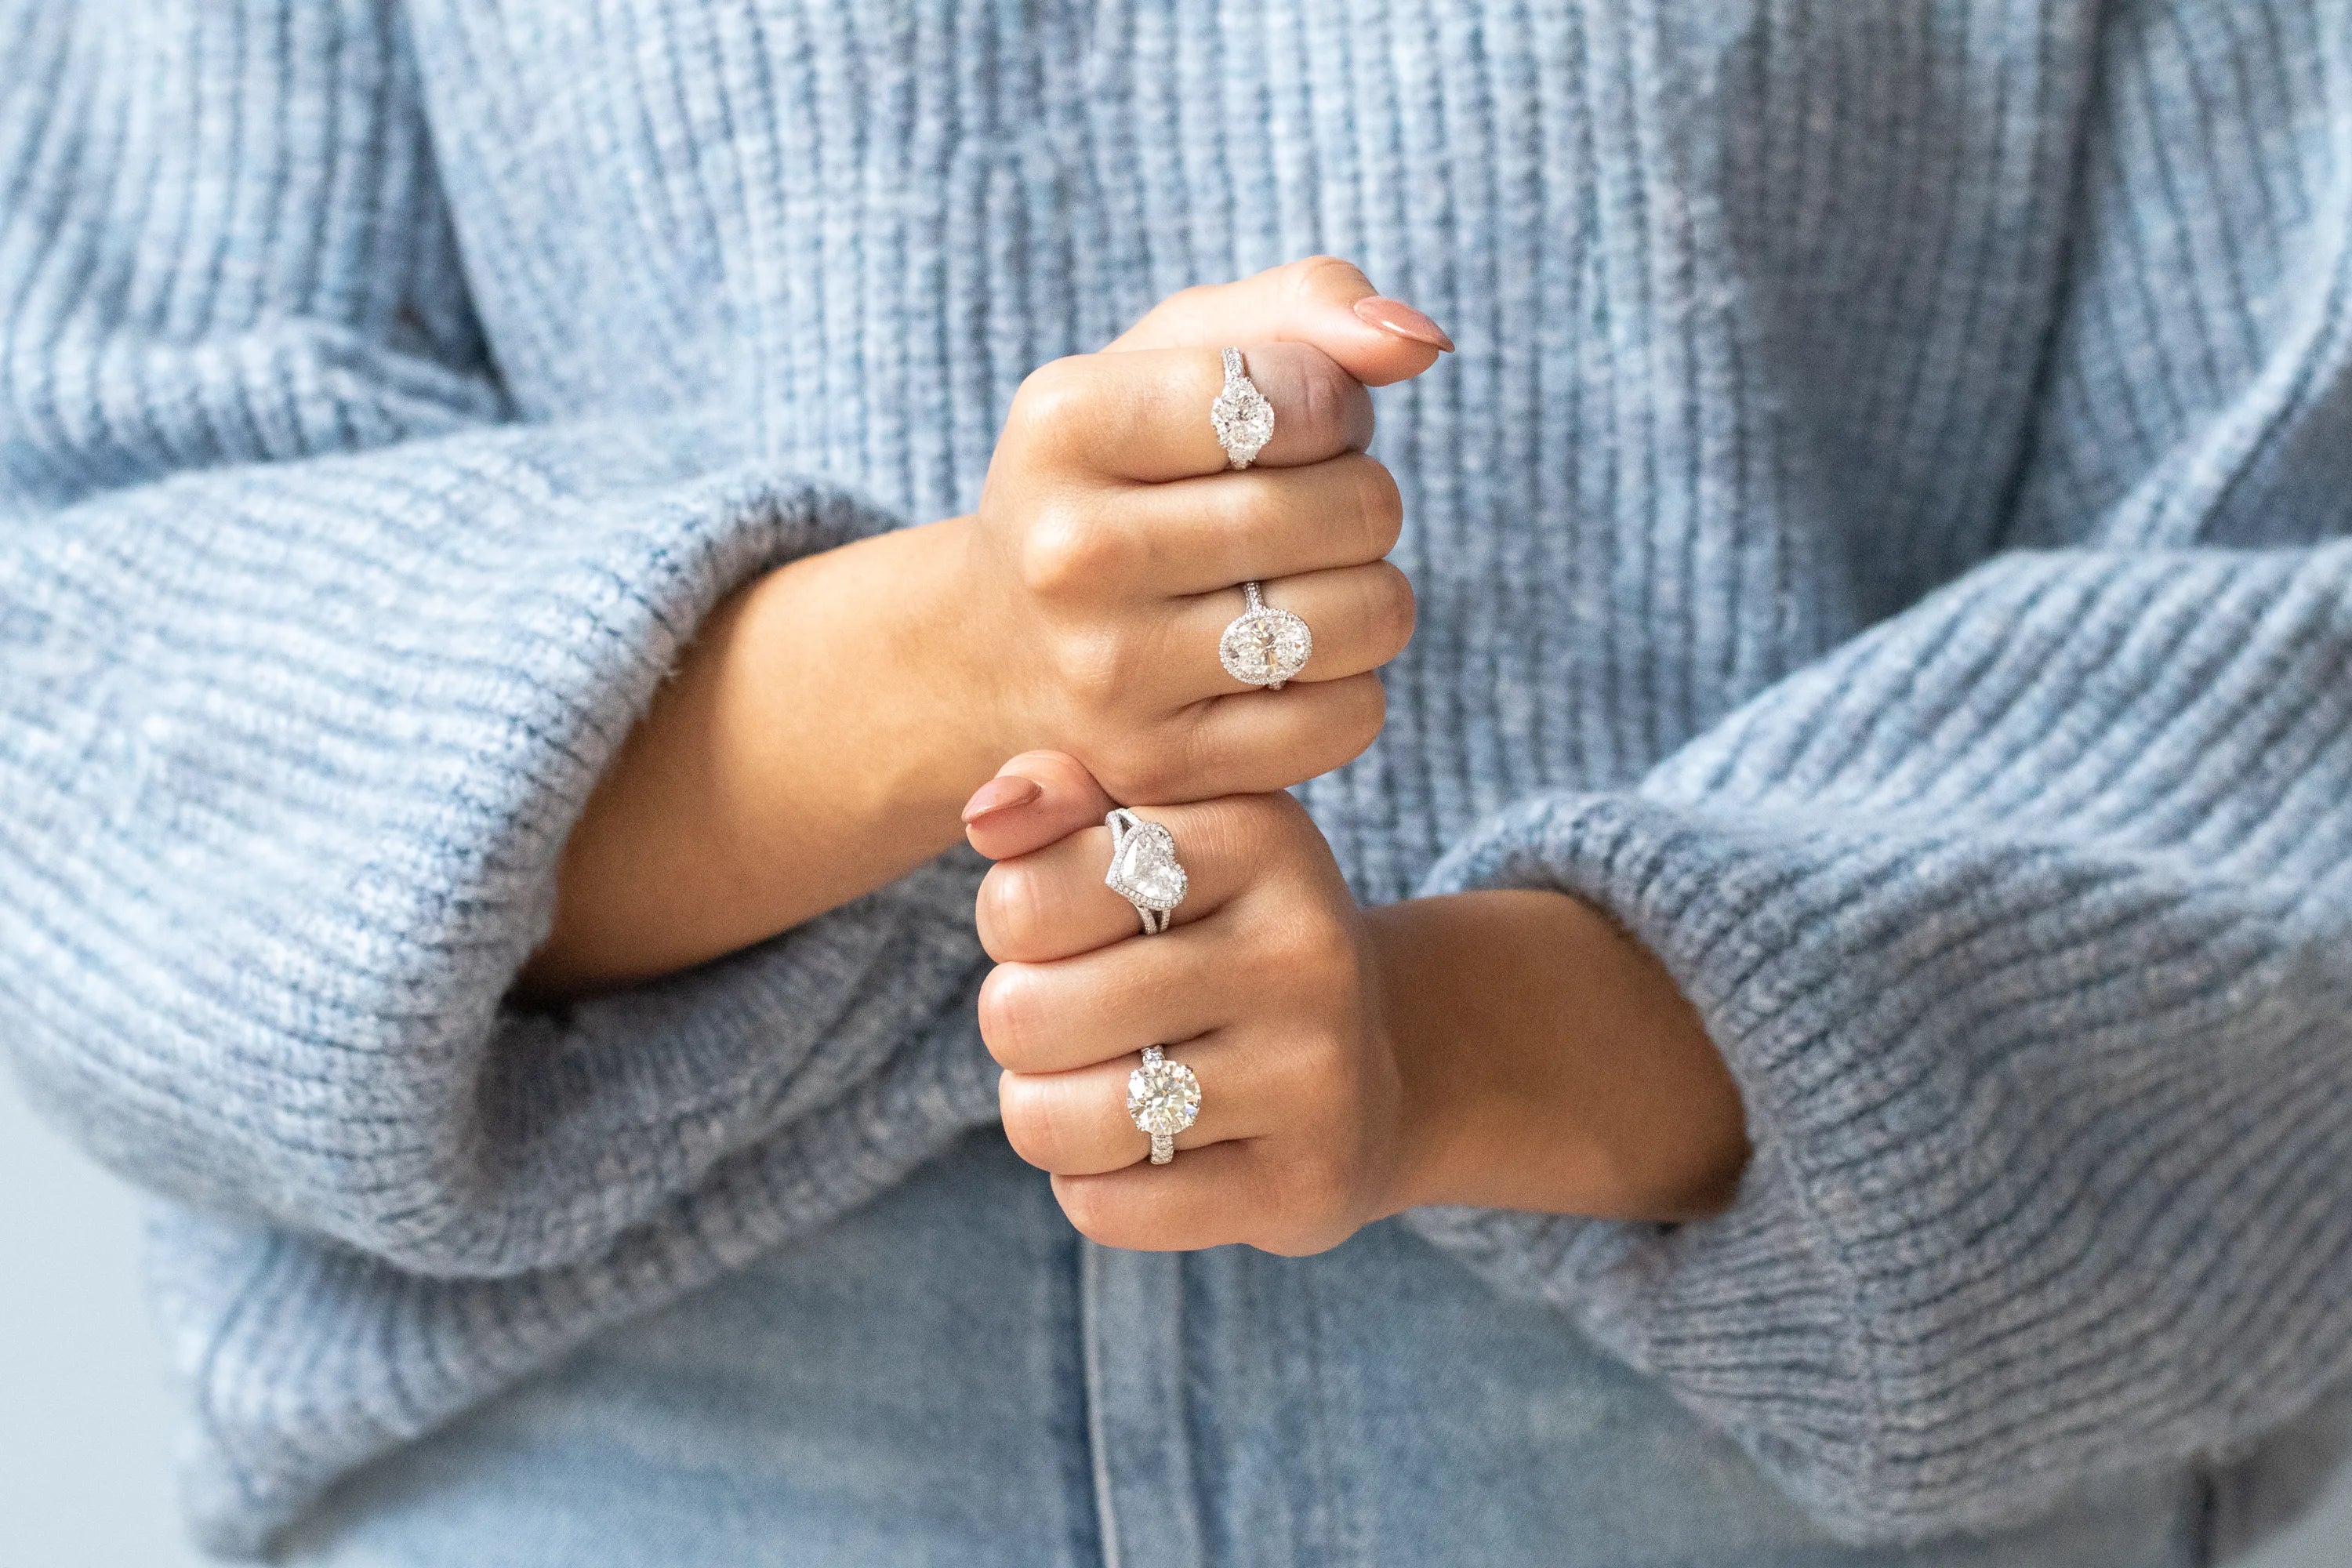 The Most Popular Shapes for Engagement Rings